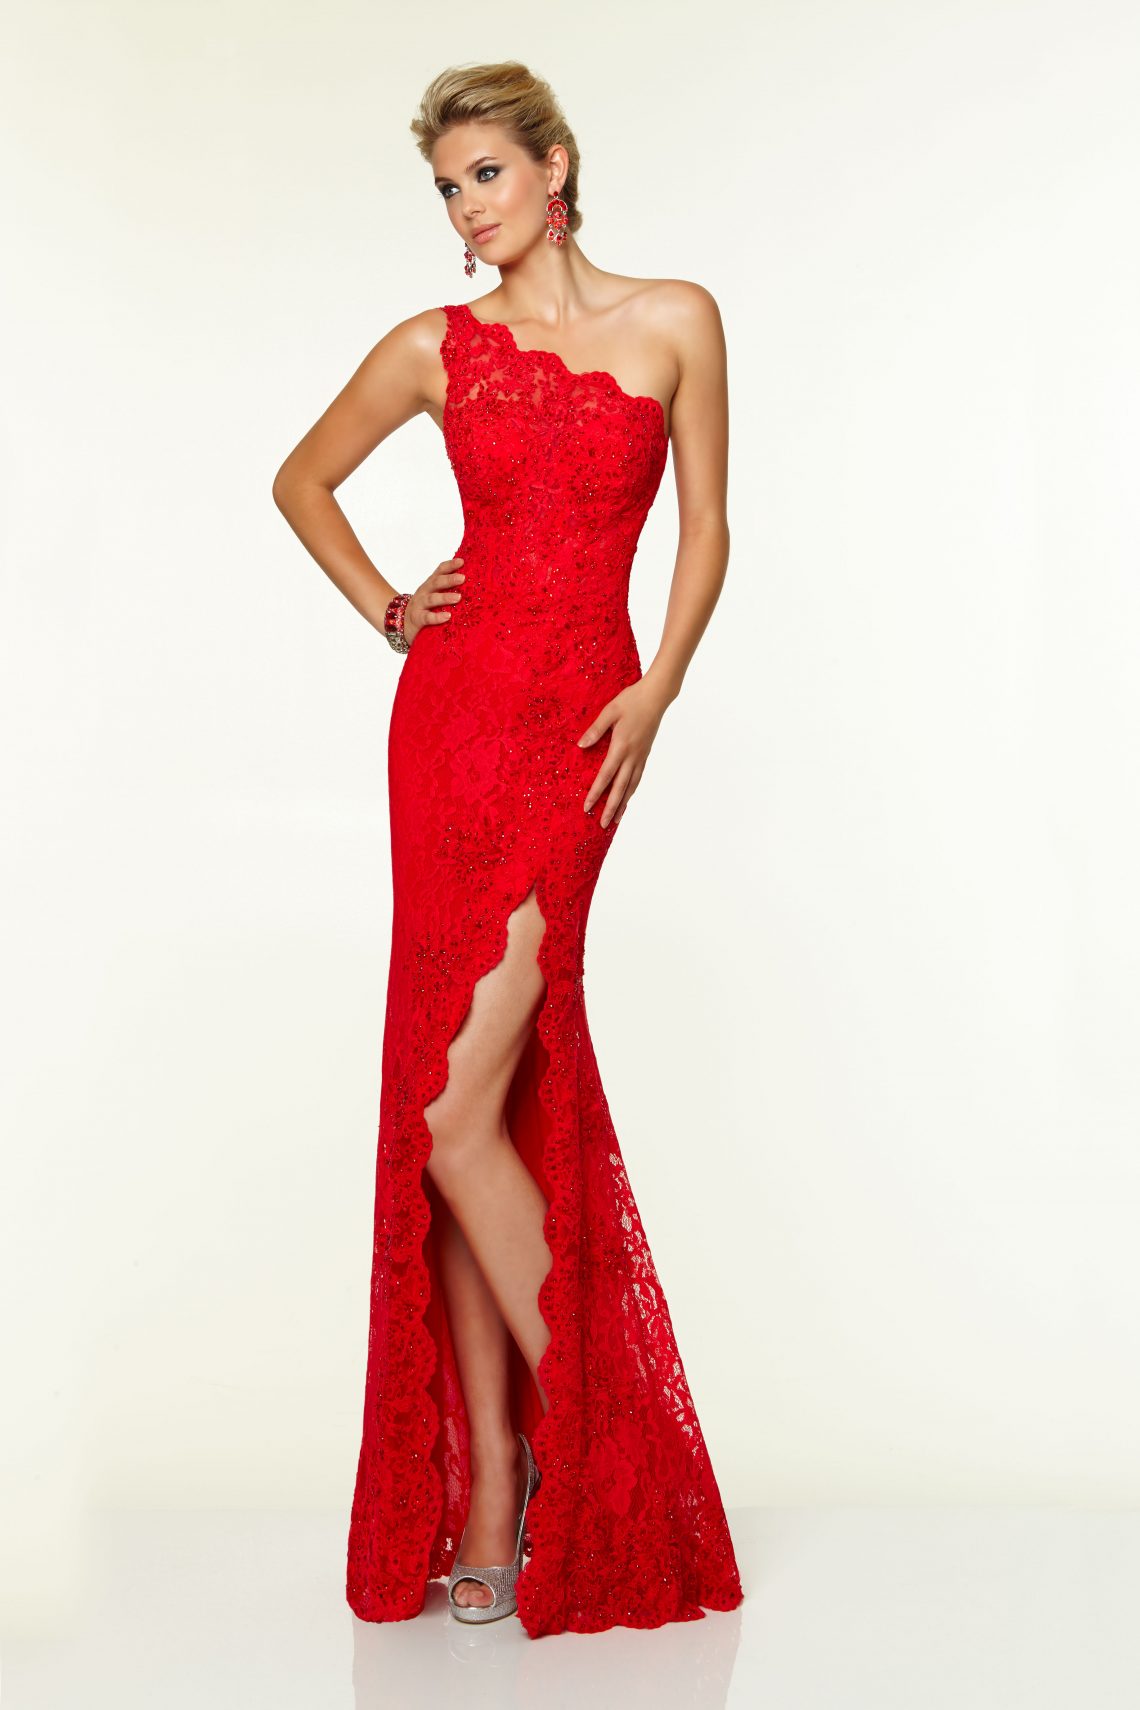 You Can Now Get This Bachelor Contestant's Rose Ceremony Dress - 29Secrets